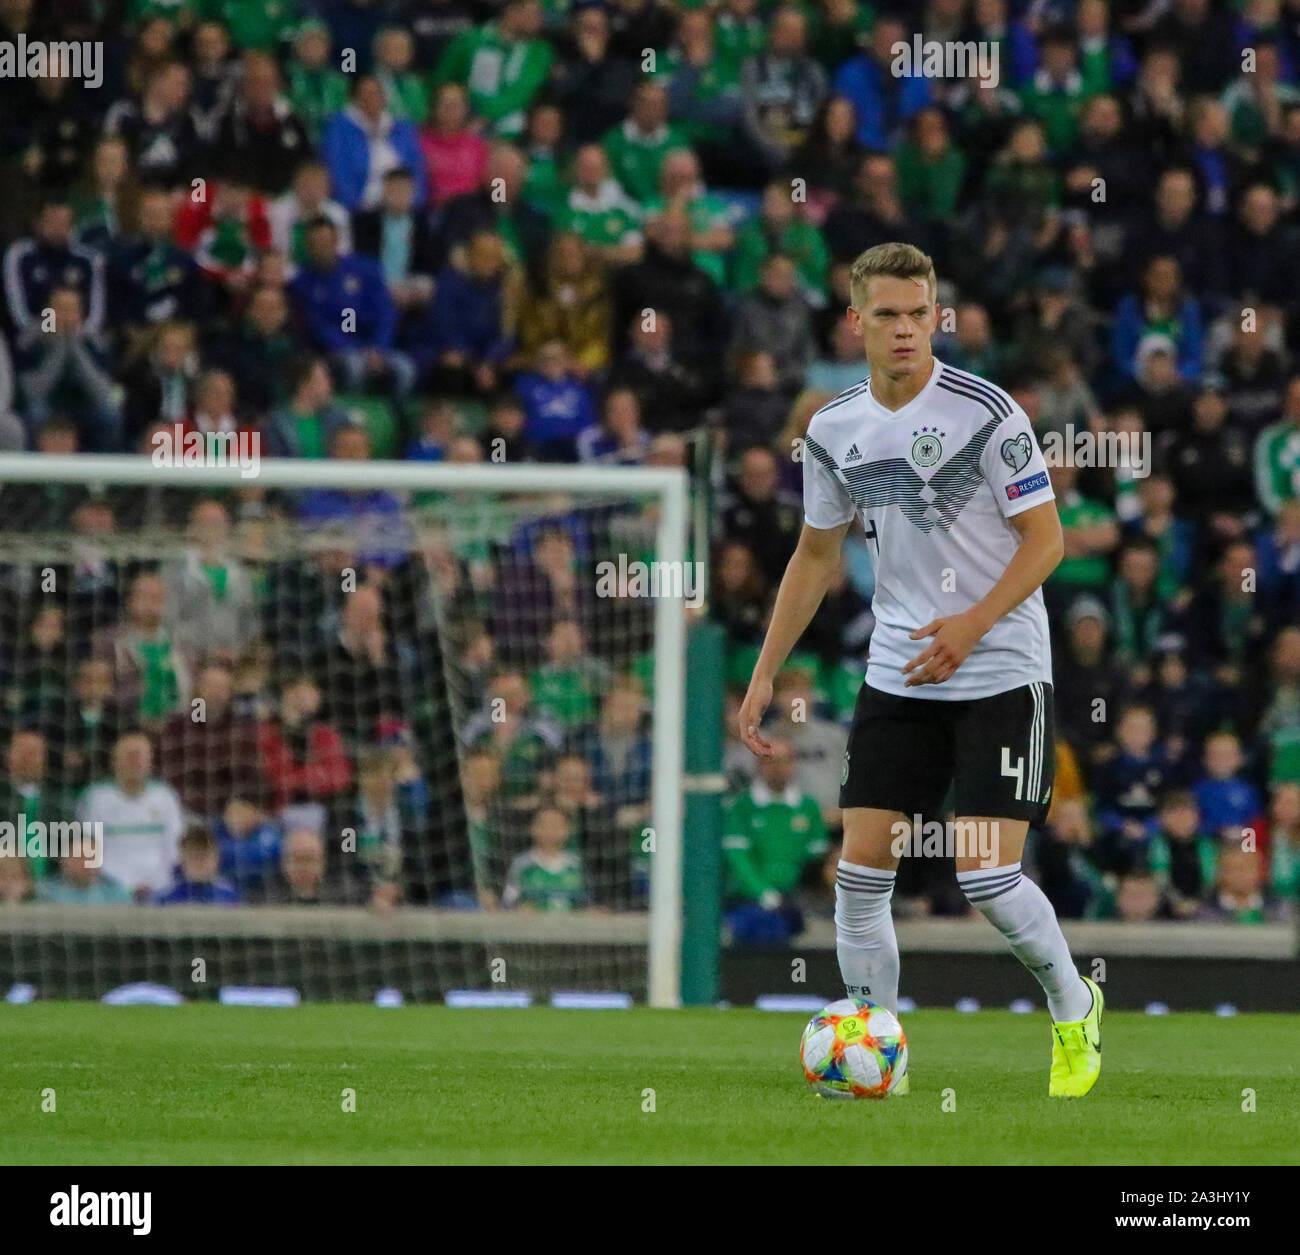 National Football Stadium at Windsor Park, Belfast, Northern Ireland. 09th Sept 2019. UEFA EURO 2020 Qualifier- Group C, Northern Ireland 0 Germany 2. German football international Mathias Ginter (4) playing for Germany in Belfast 2019. Stock Photo